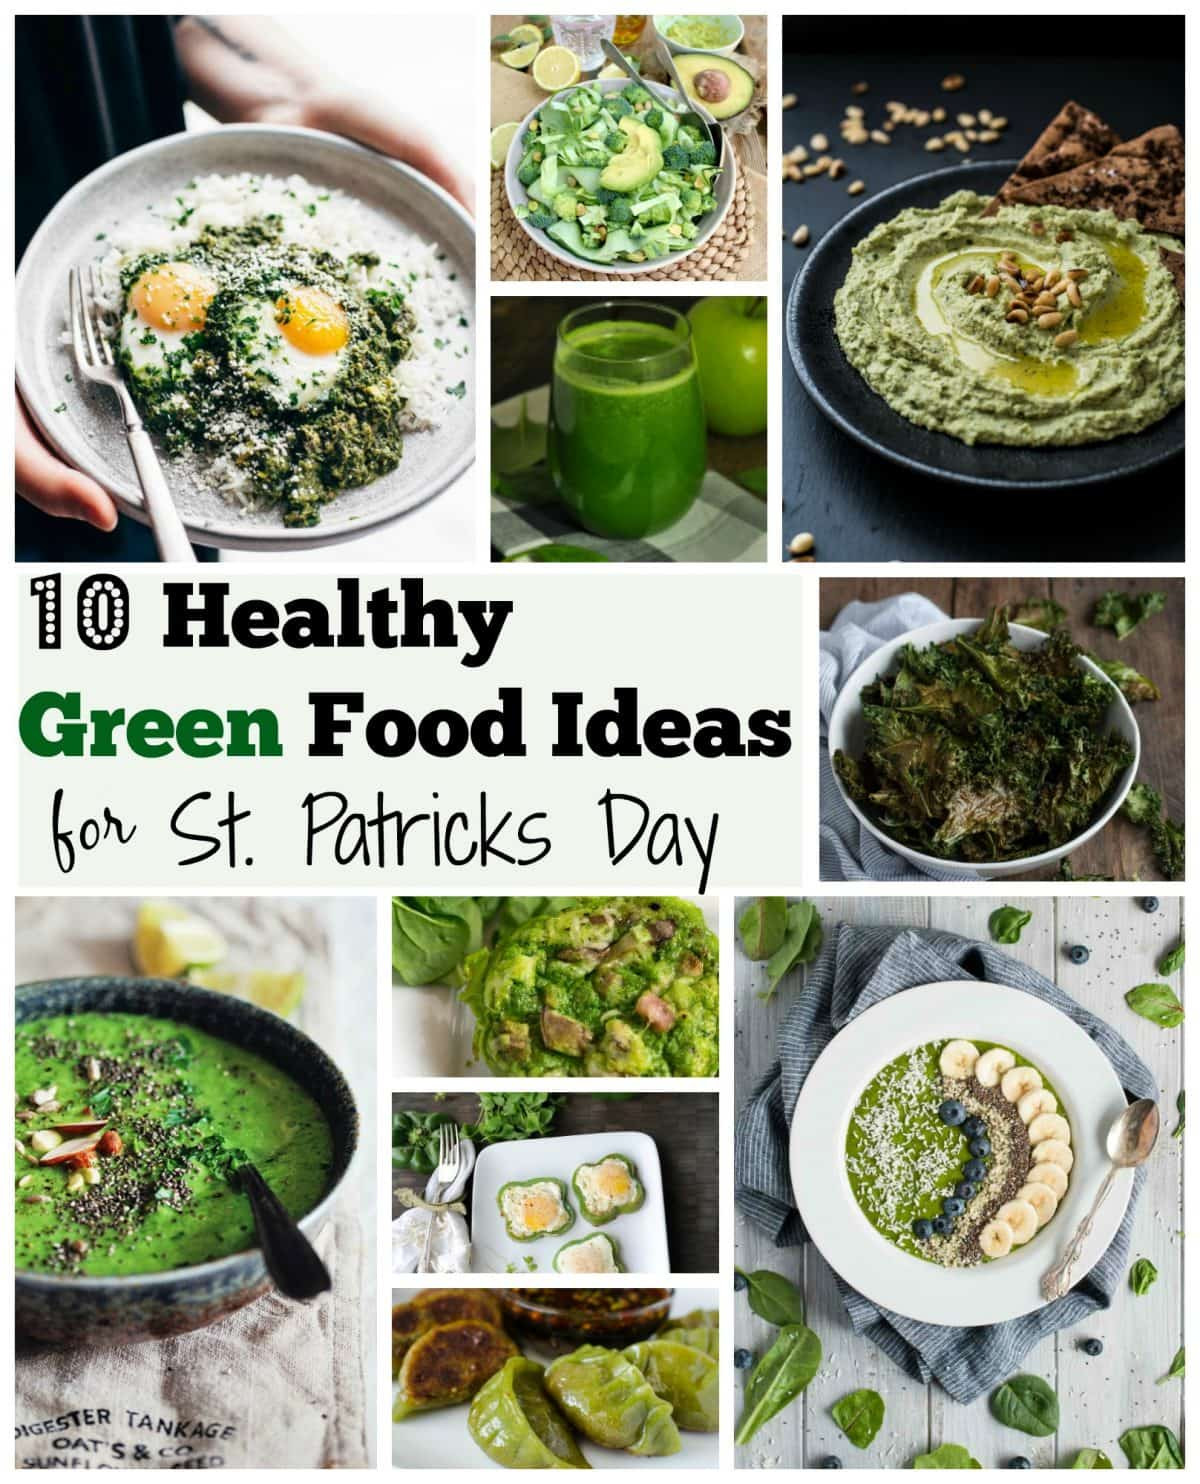 St Patrick's Day Food
 10 Healthy Green Food Ideas for St Patricks Day